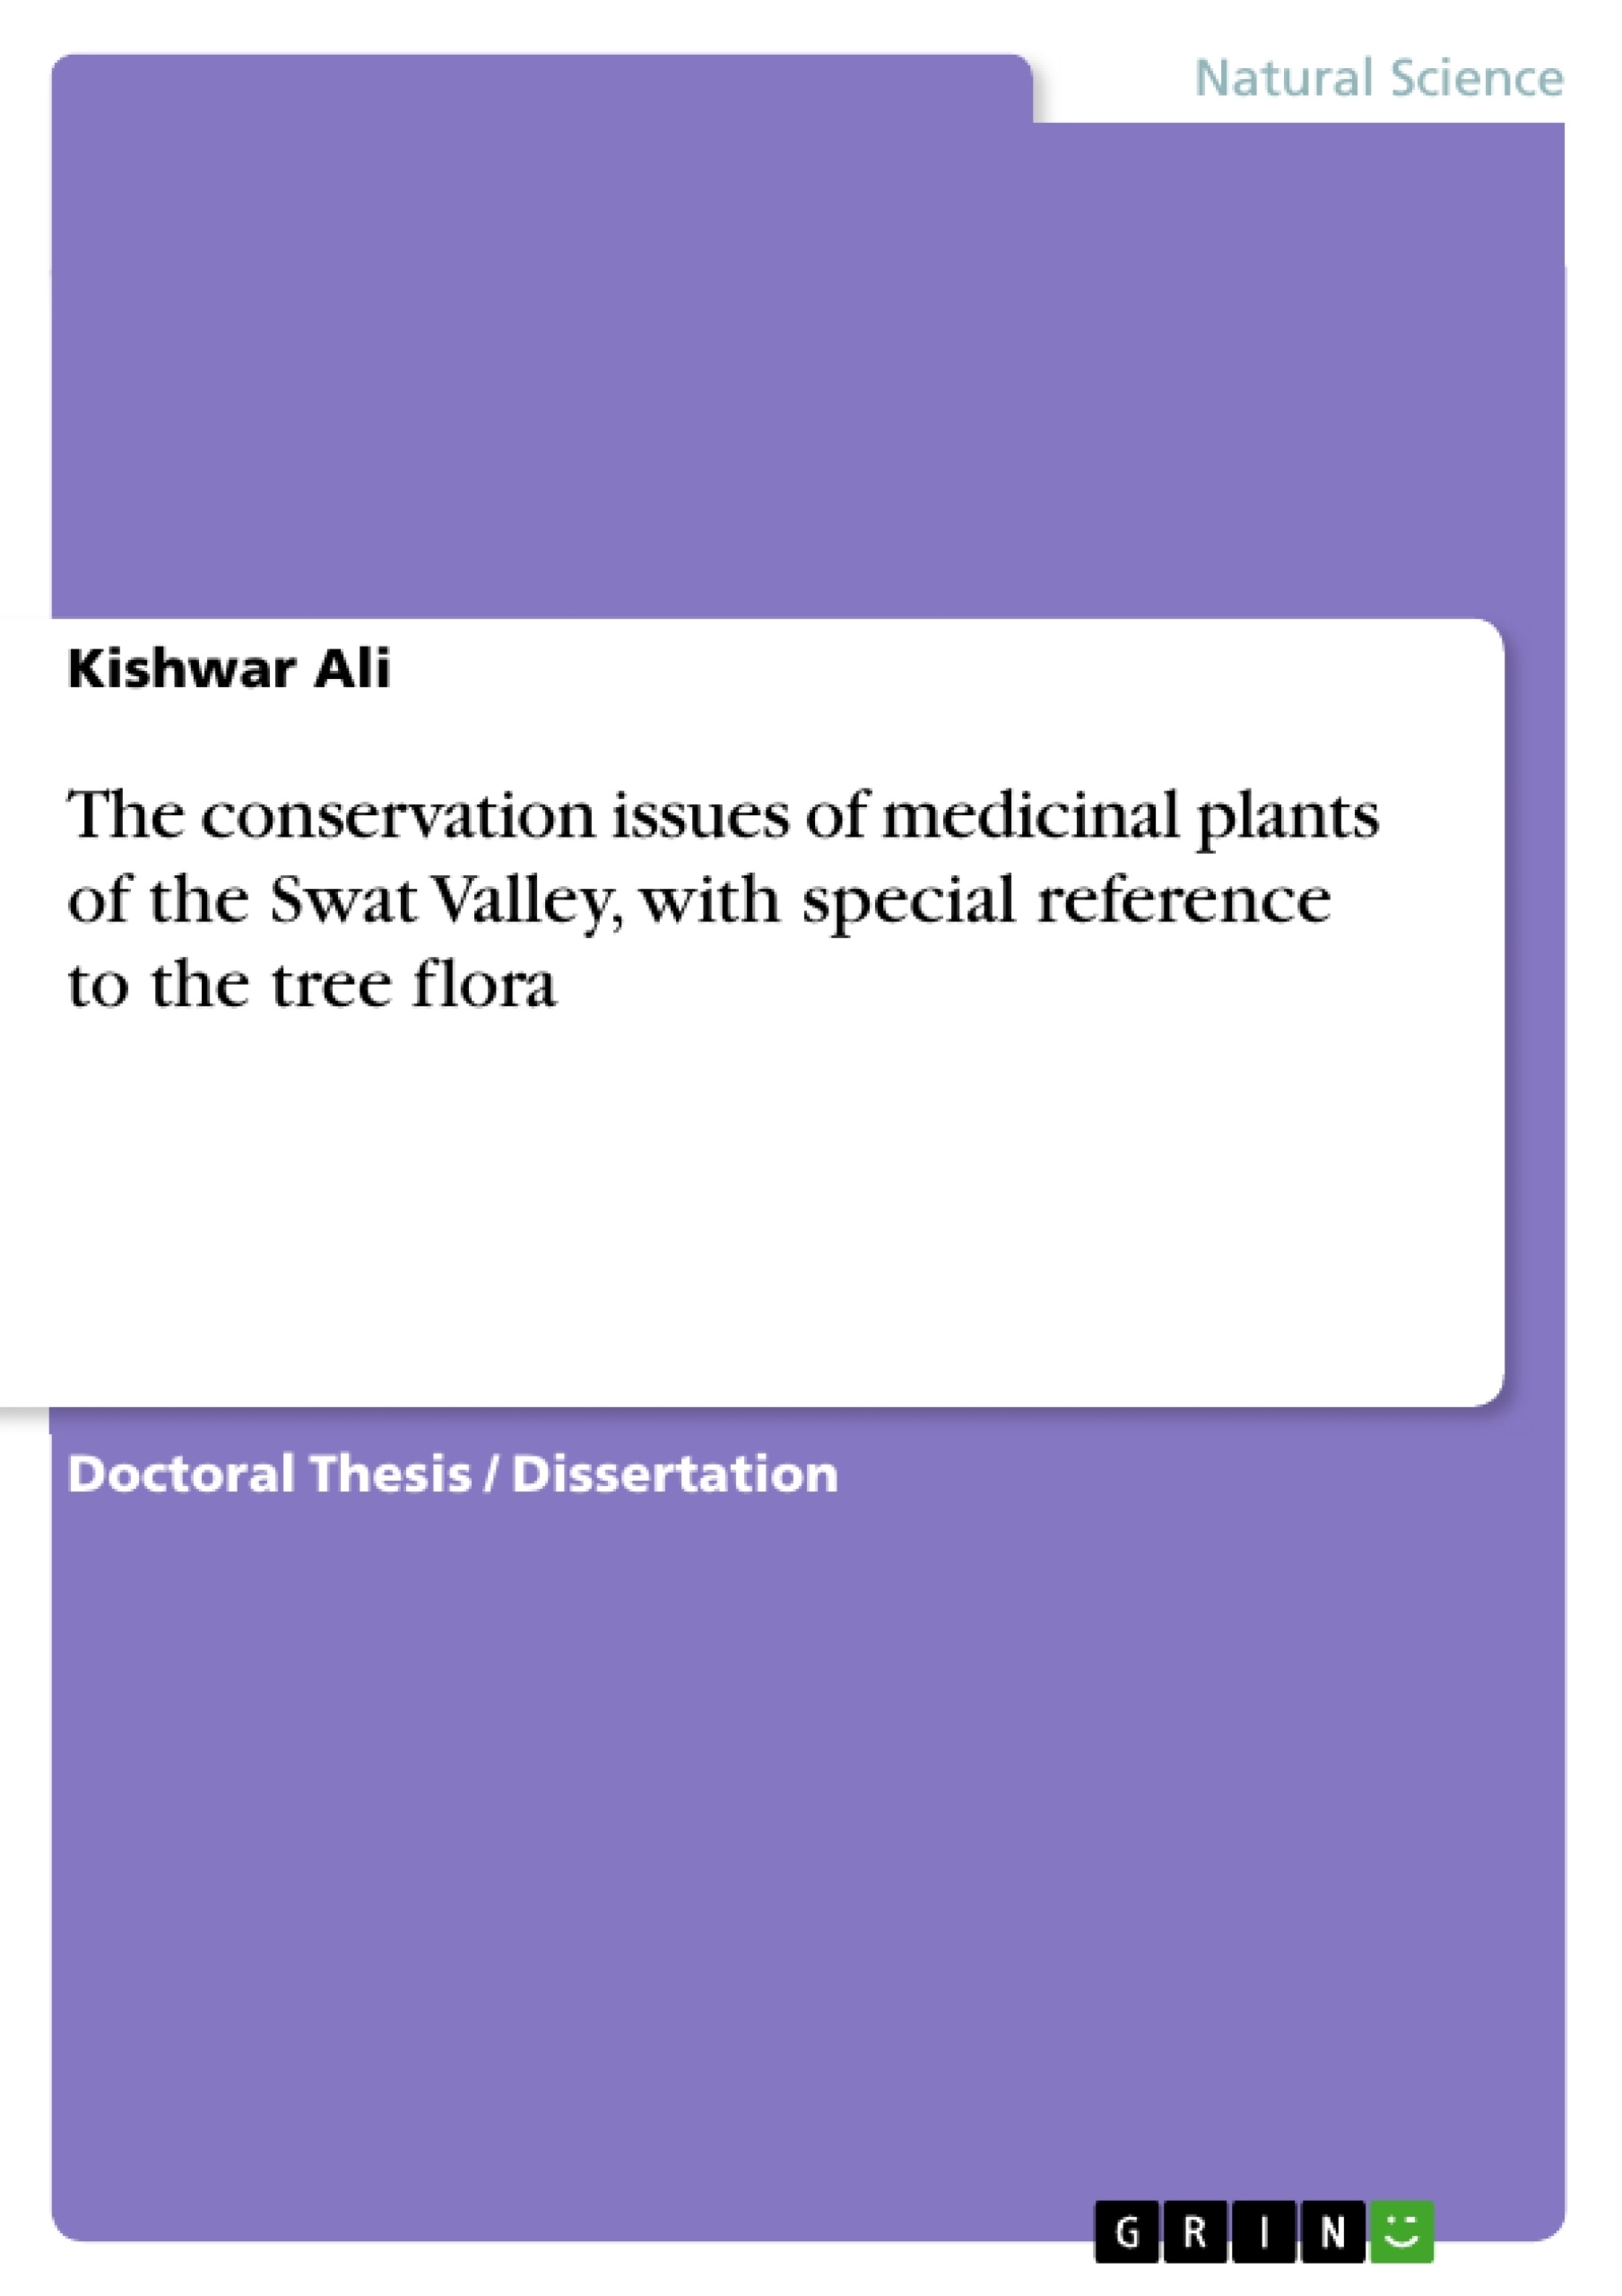 Título: The conservation issues of medicinal plants of the Swat Valley, with special reference to the tree flora